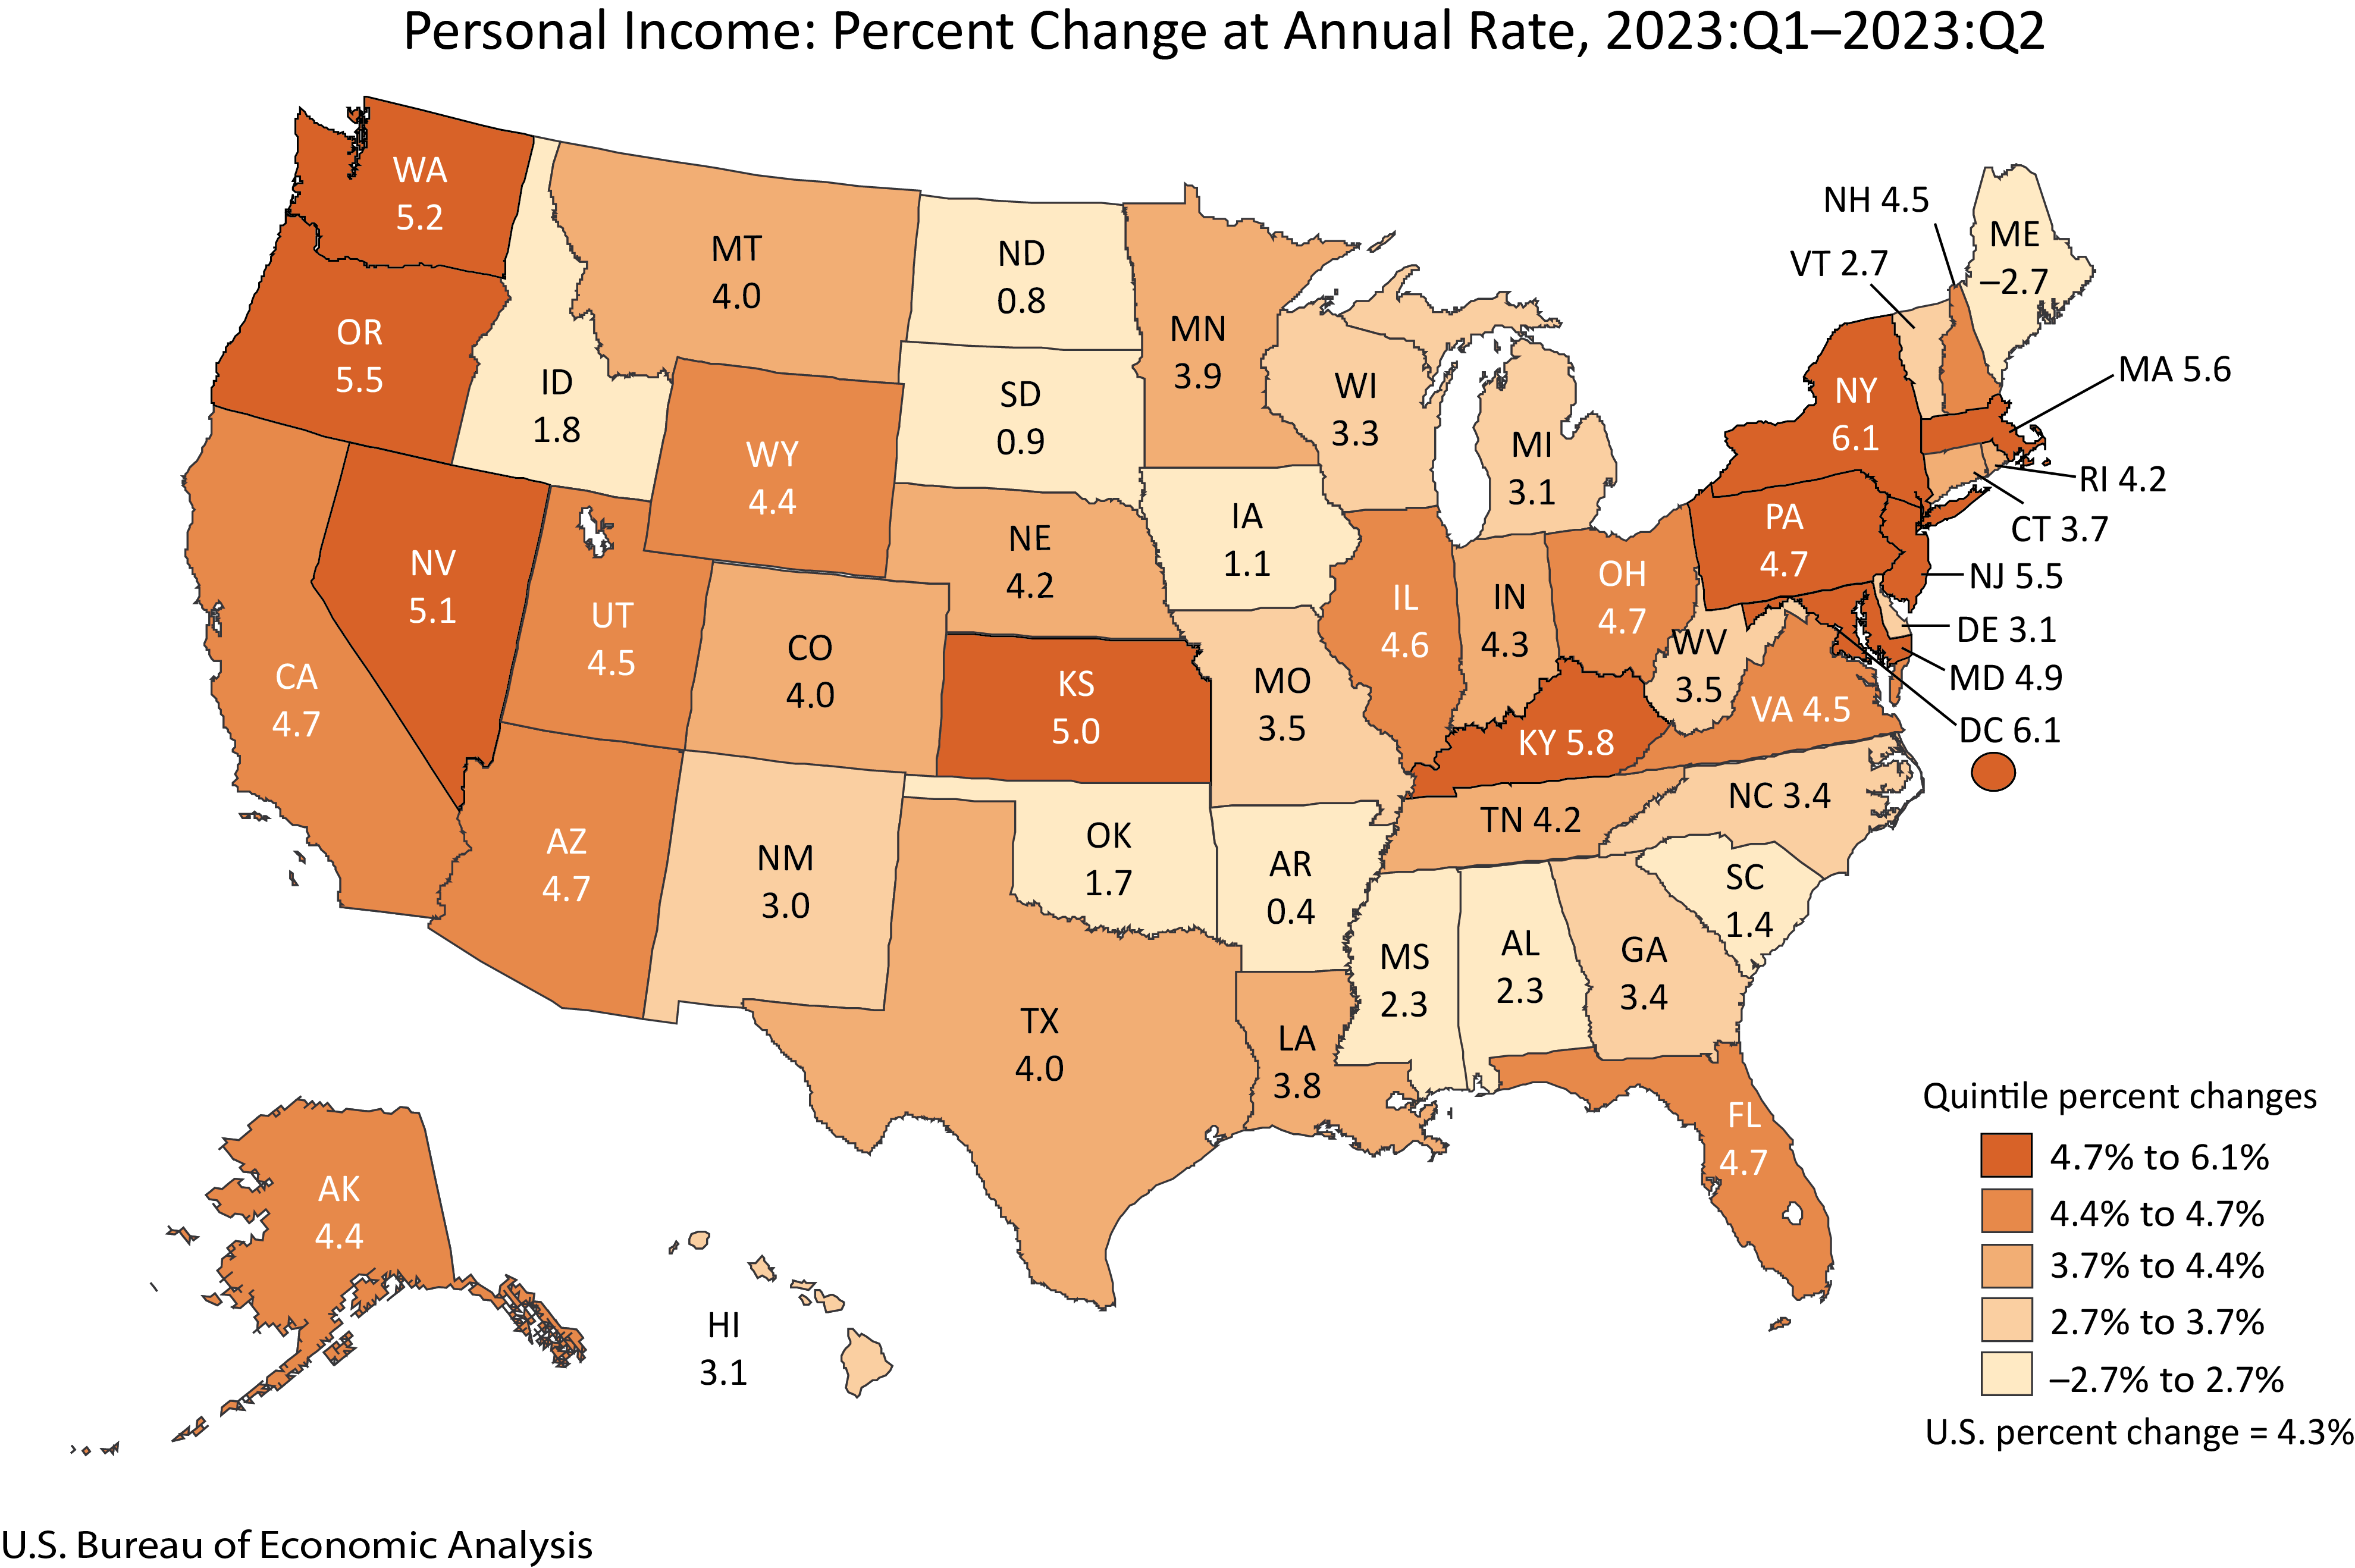 Personal Income: Percent Change at Annual Rate, 2023:Q1-2023:Q2